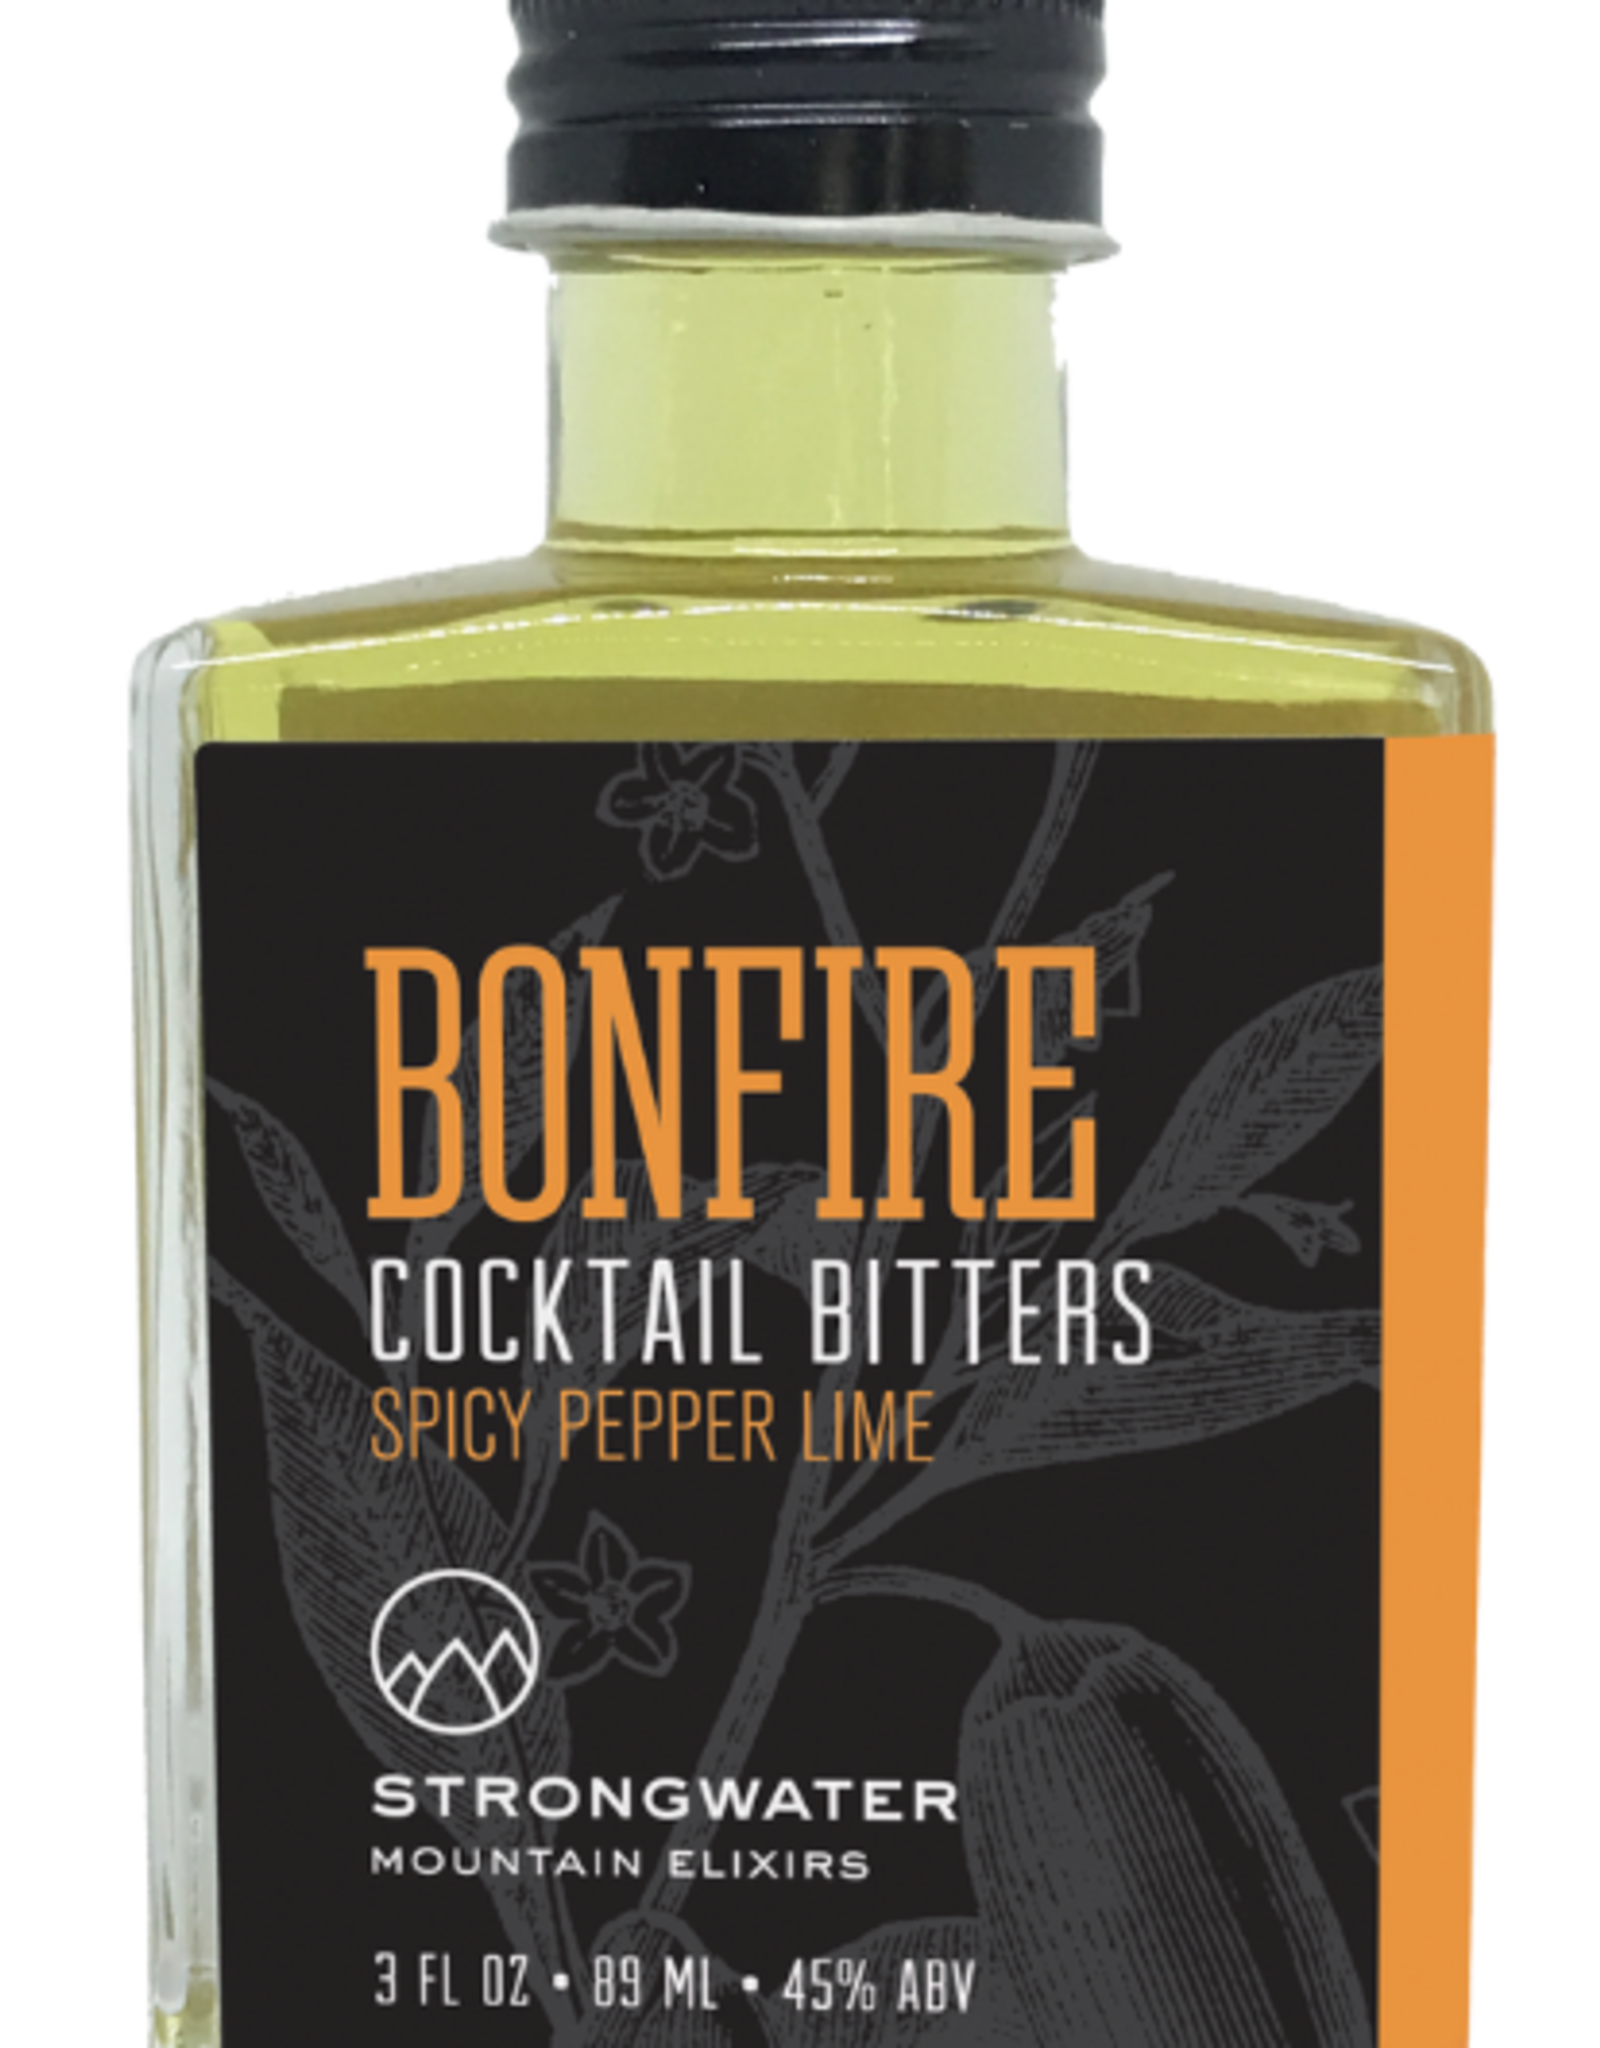 Cocktail Bitters Bonfire Spicy Pepper and Lime